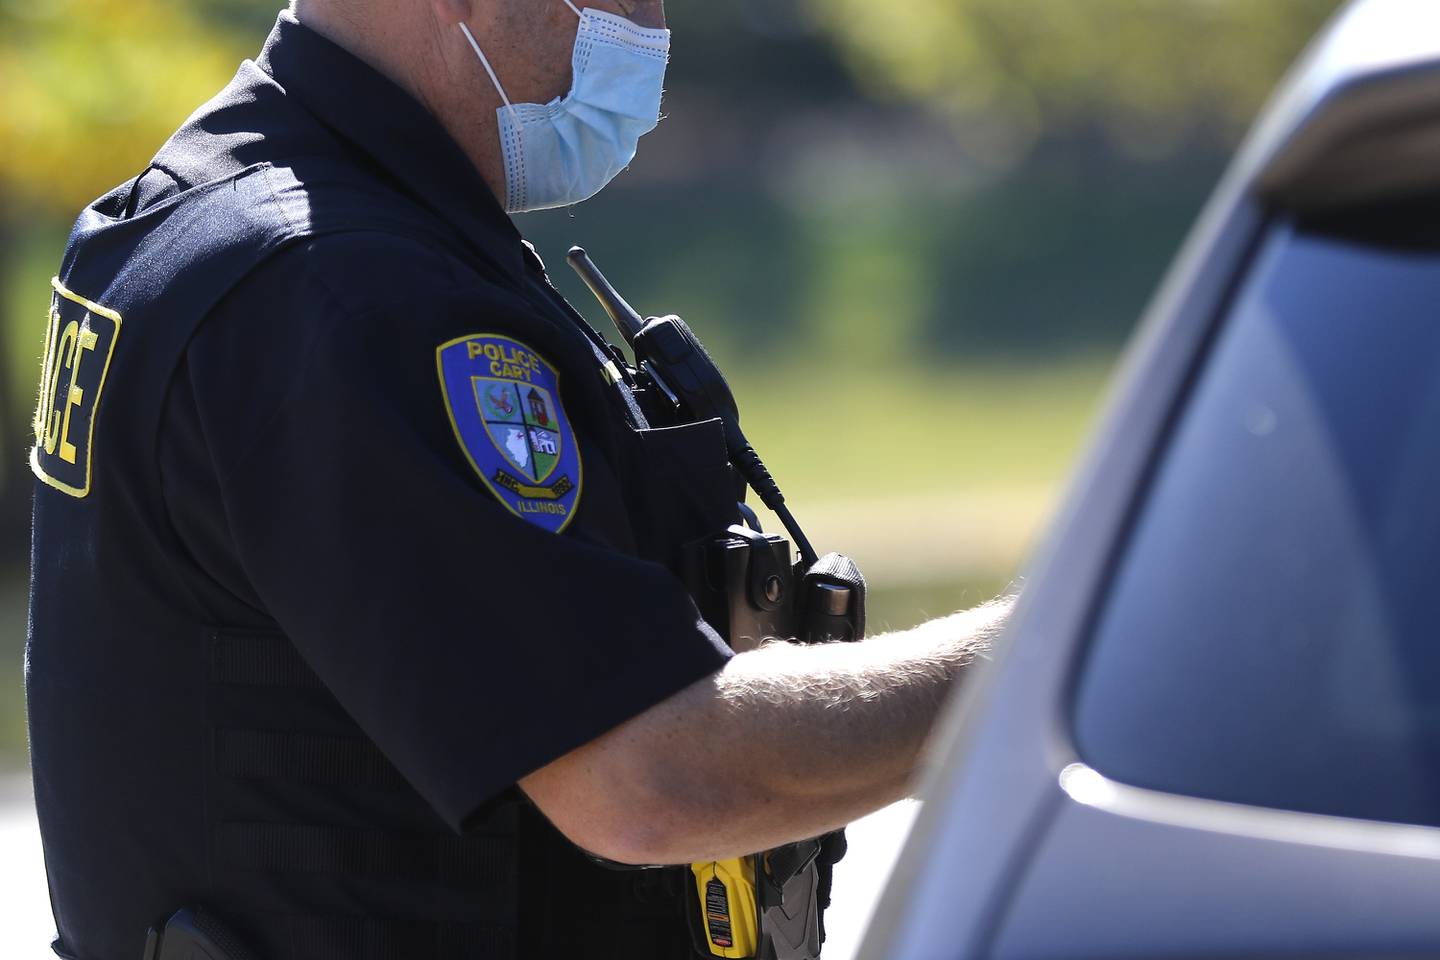 An unidentified police officer makes a traffic stop while wearing a facemask on Tuesday, Sept. 28, 2021 in Cary.